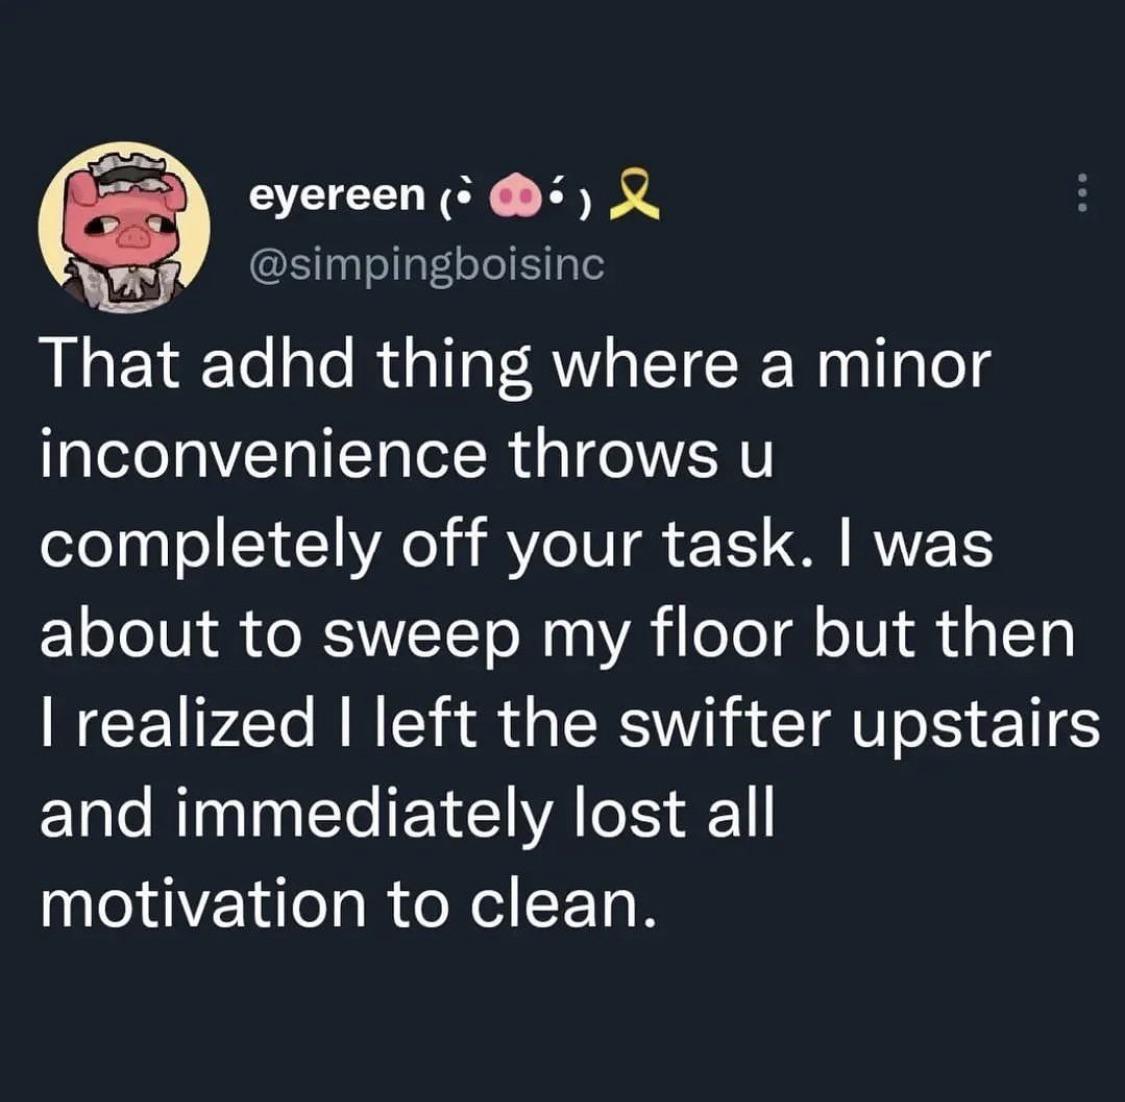 funny tweets - point - eyereen & That adhd thing where a minor inconvenience throws u completely off your task. I was about to sweep my floor but then I realized I left the swifter upstairs and immediately lost all motivation to clean.